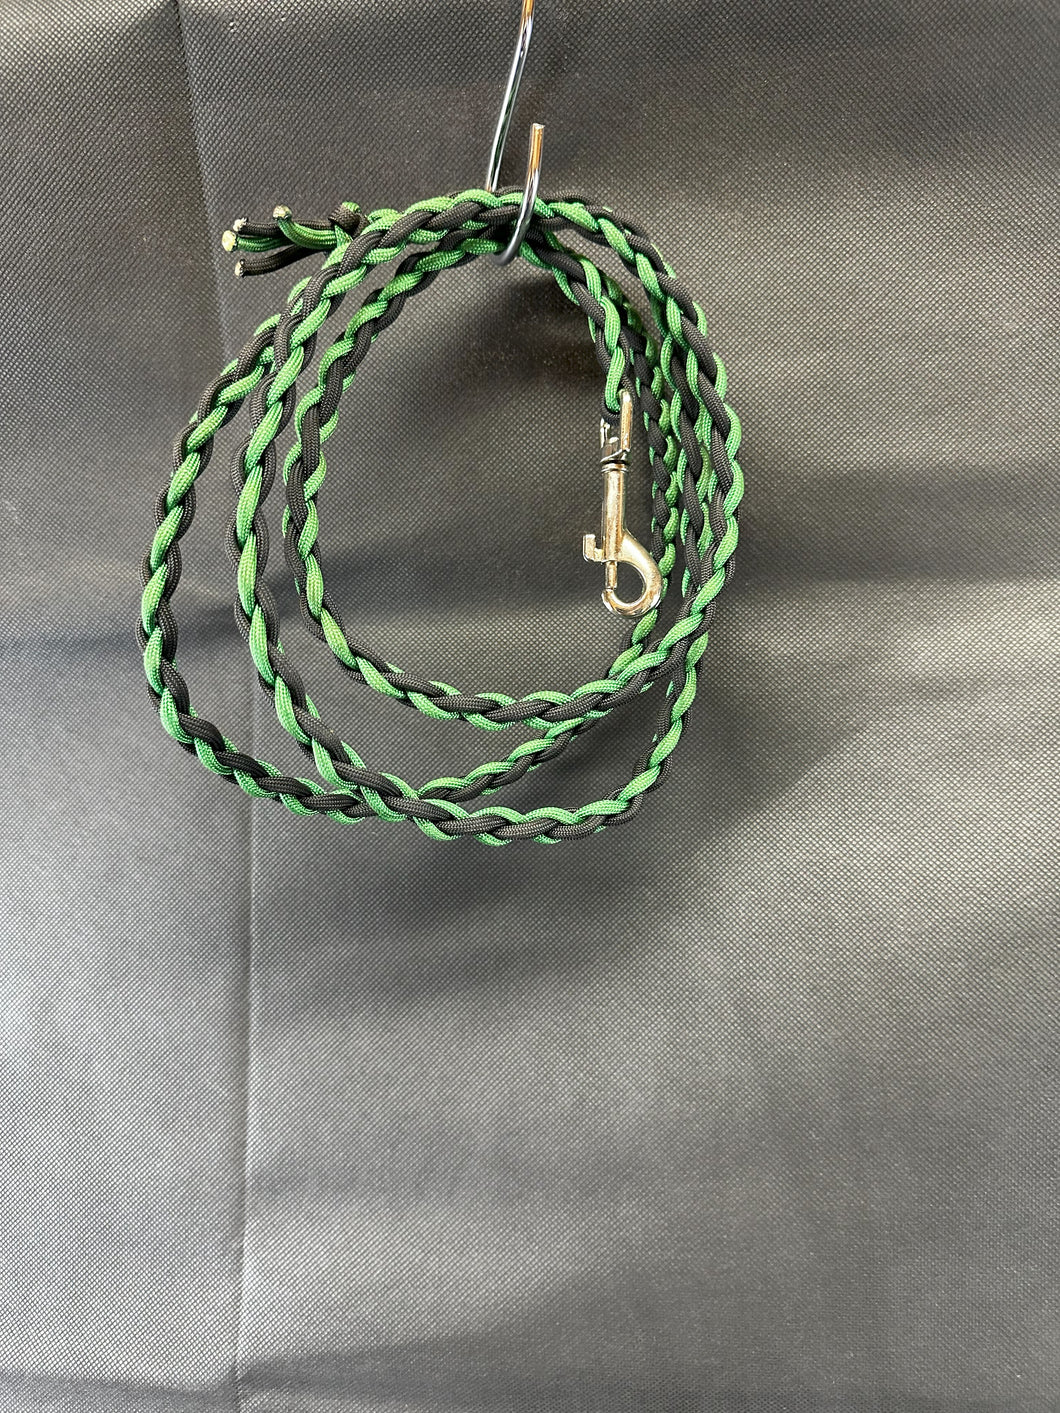 Paracord Dog Leashes by Quirt & Cinch